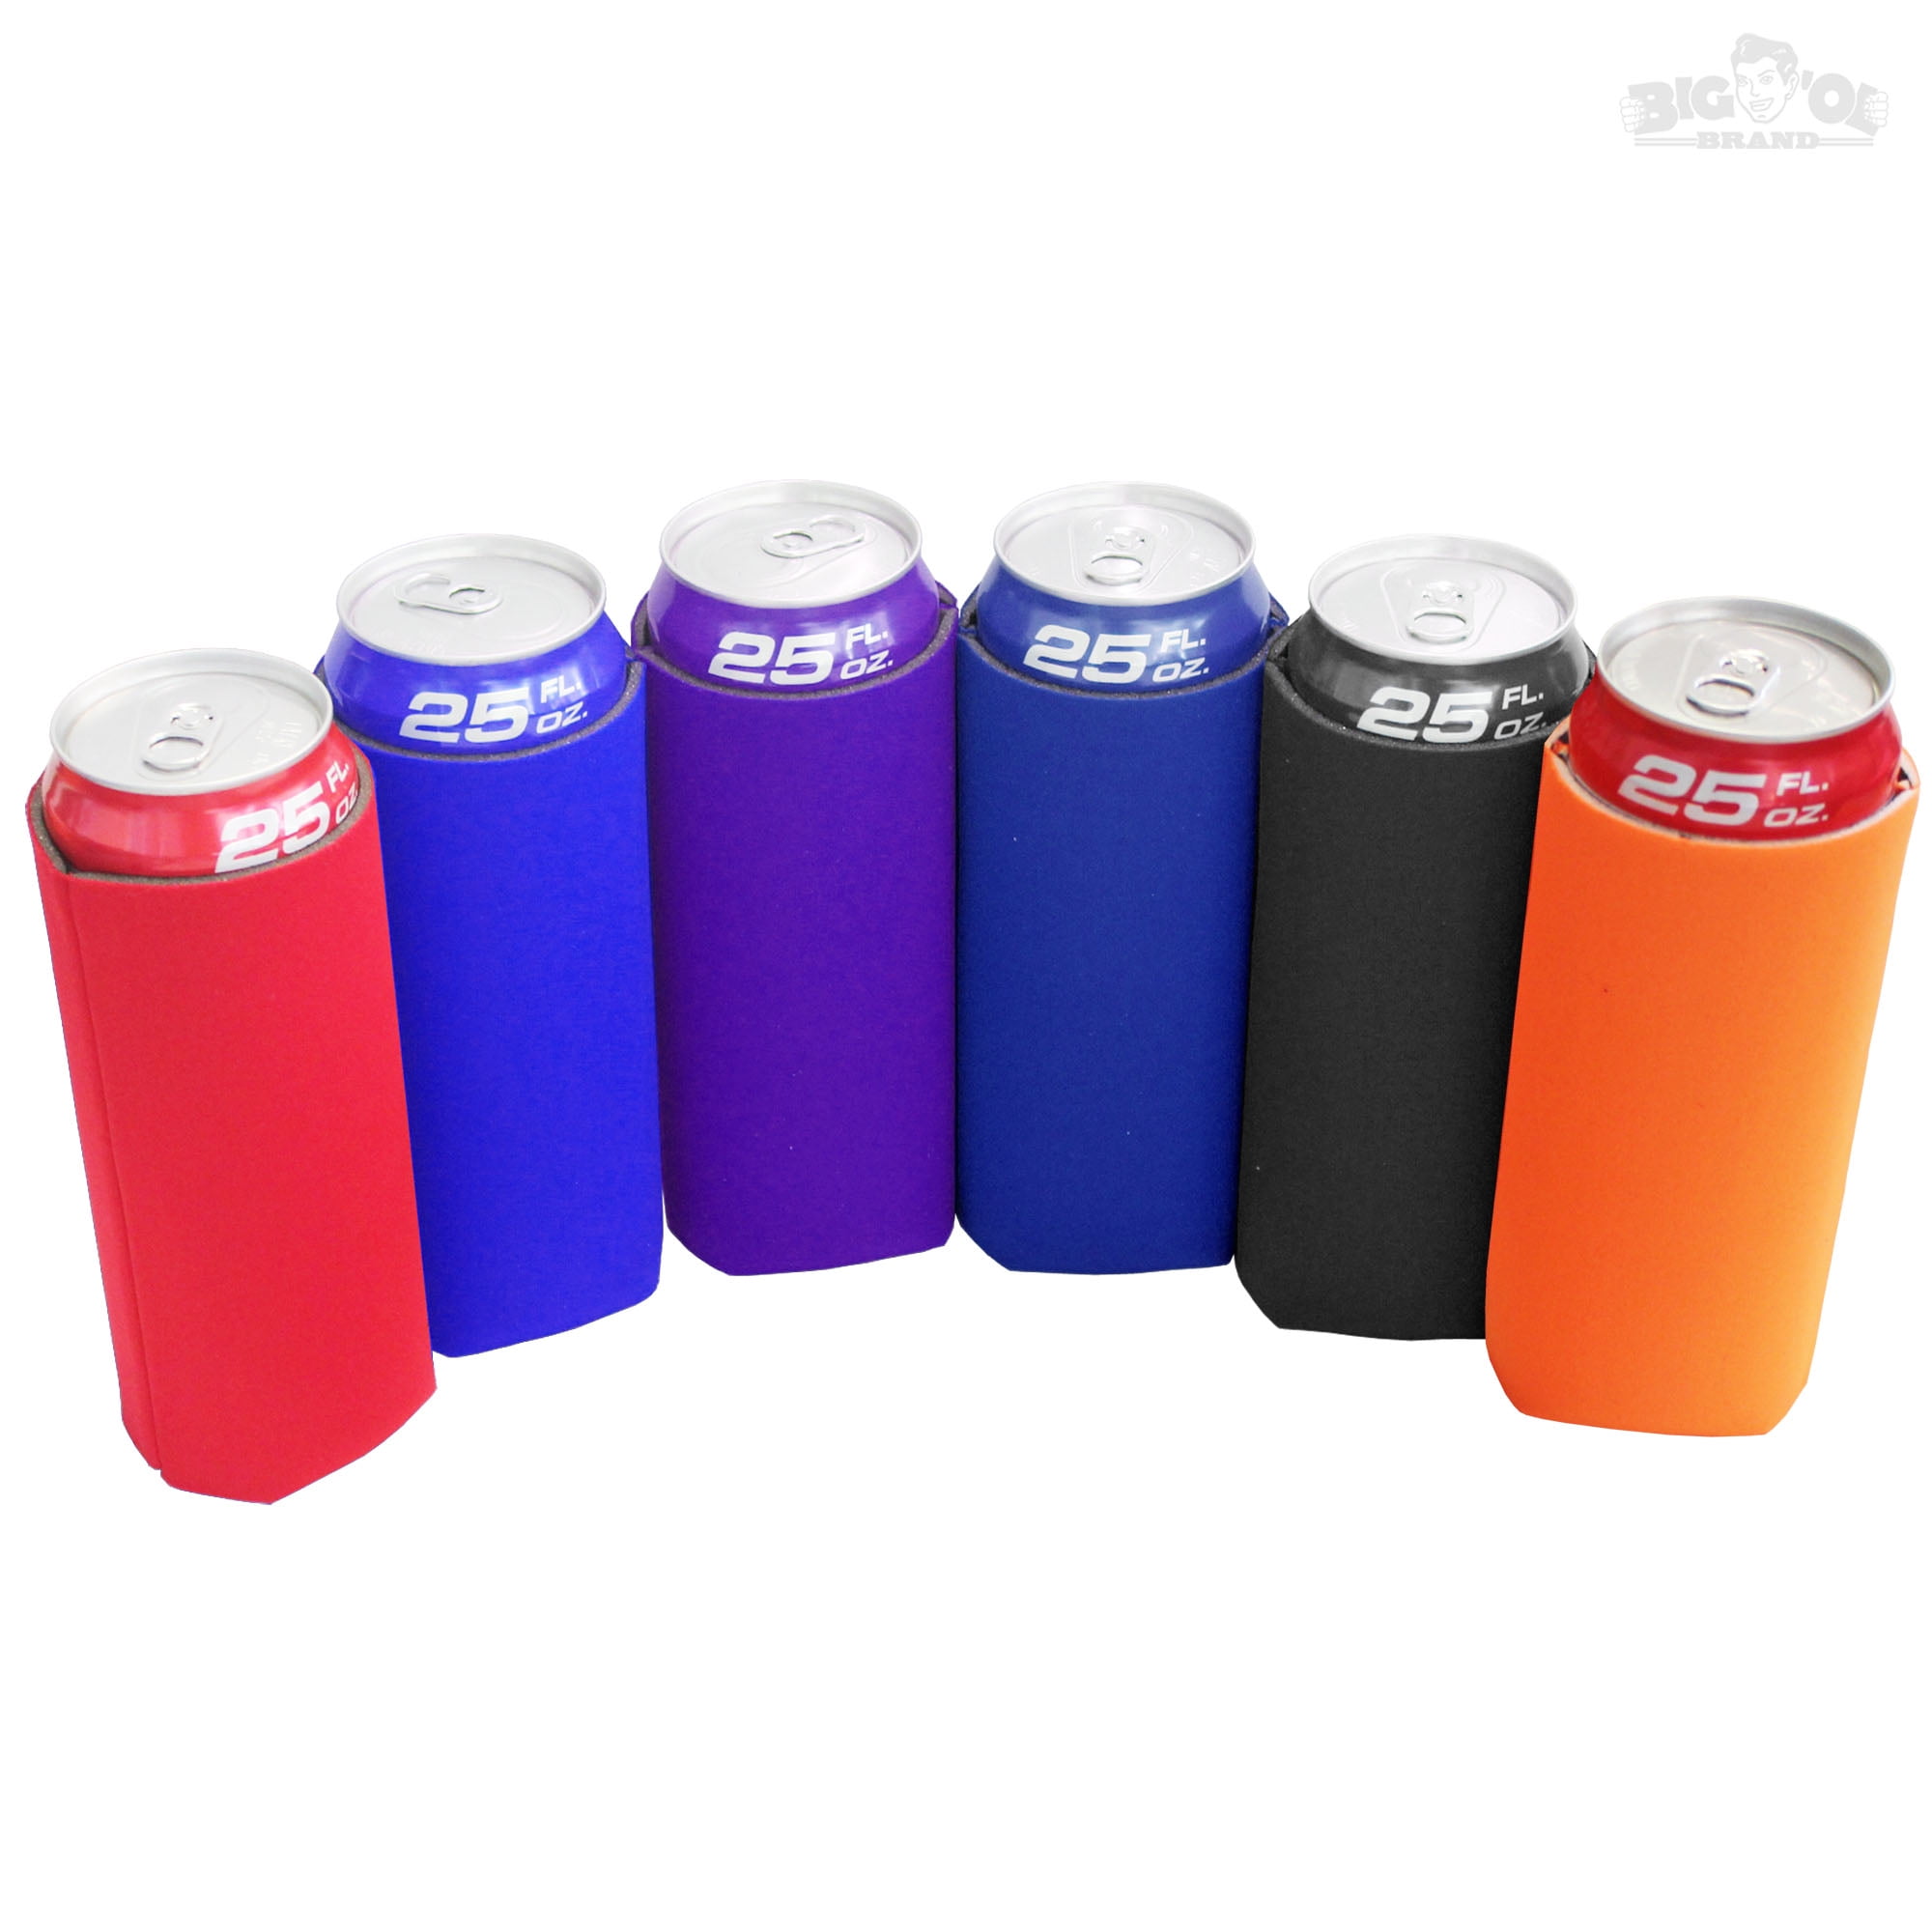 Logo Can Coolers Assorted Premium Collapsible Cooler Cans And Bottles Holder Colors May Vary Customizable Text Beer Drink Insulator Sleeve Assorted 50 pack